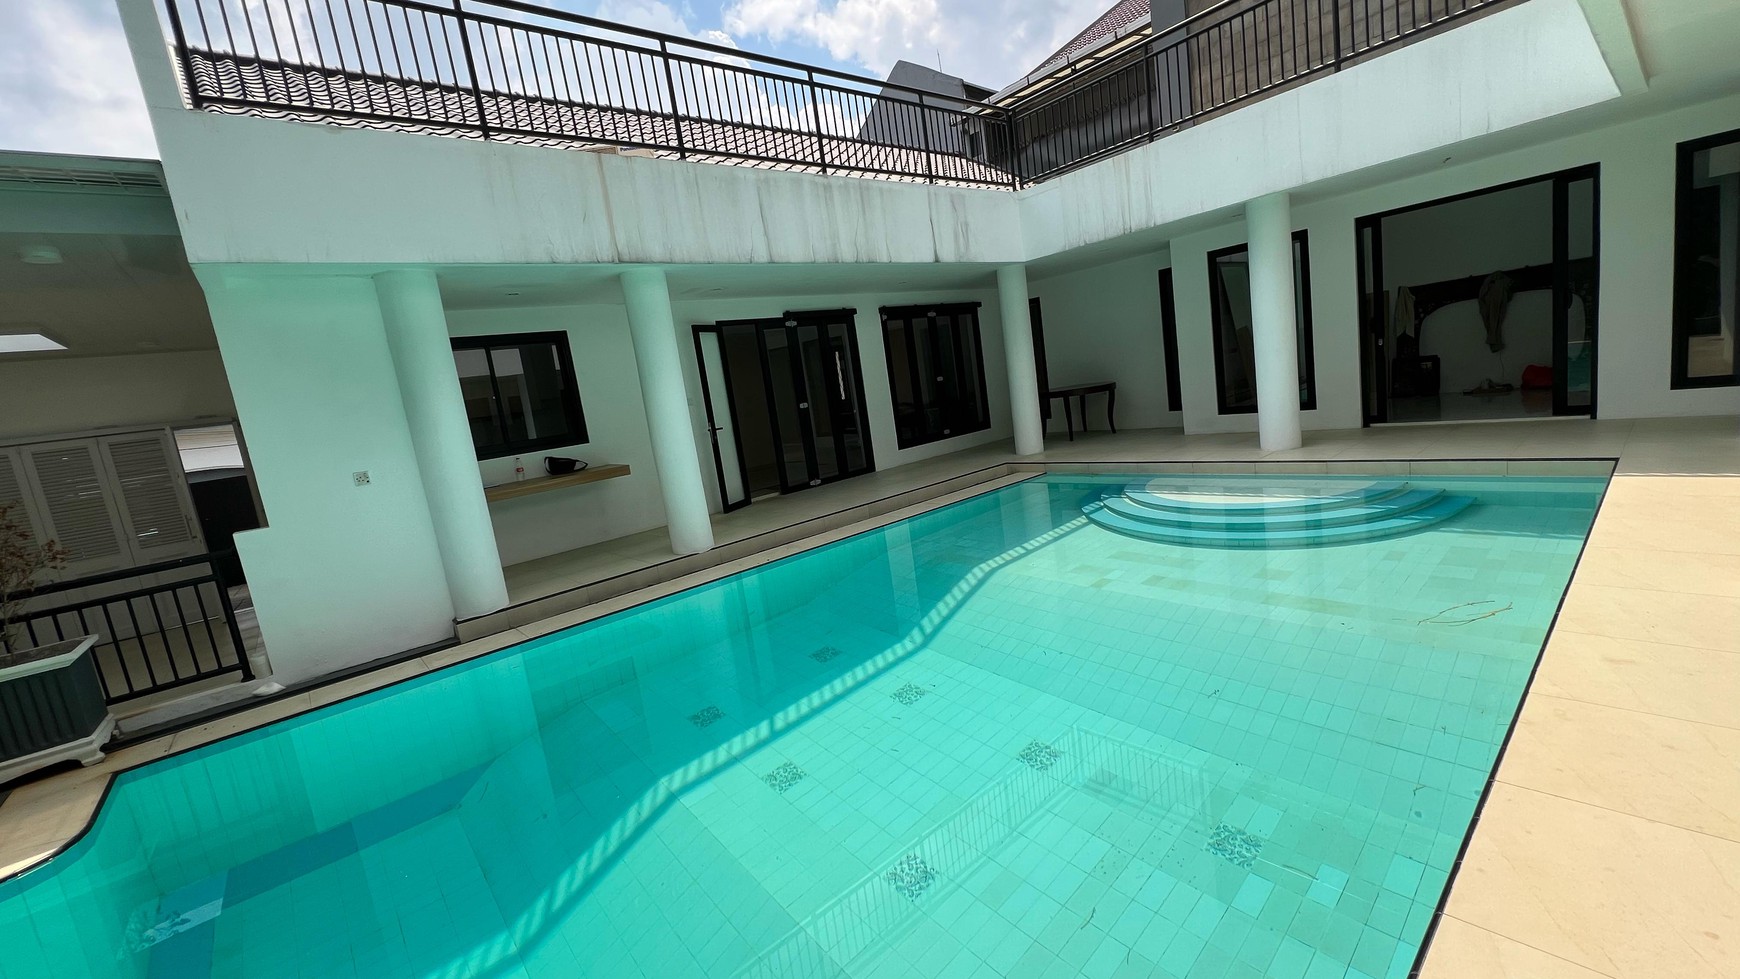 Newly Renovated bright house located cipete close to france school, mentari school, and kemang